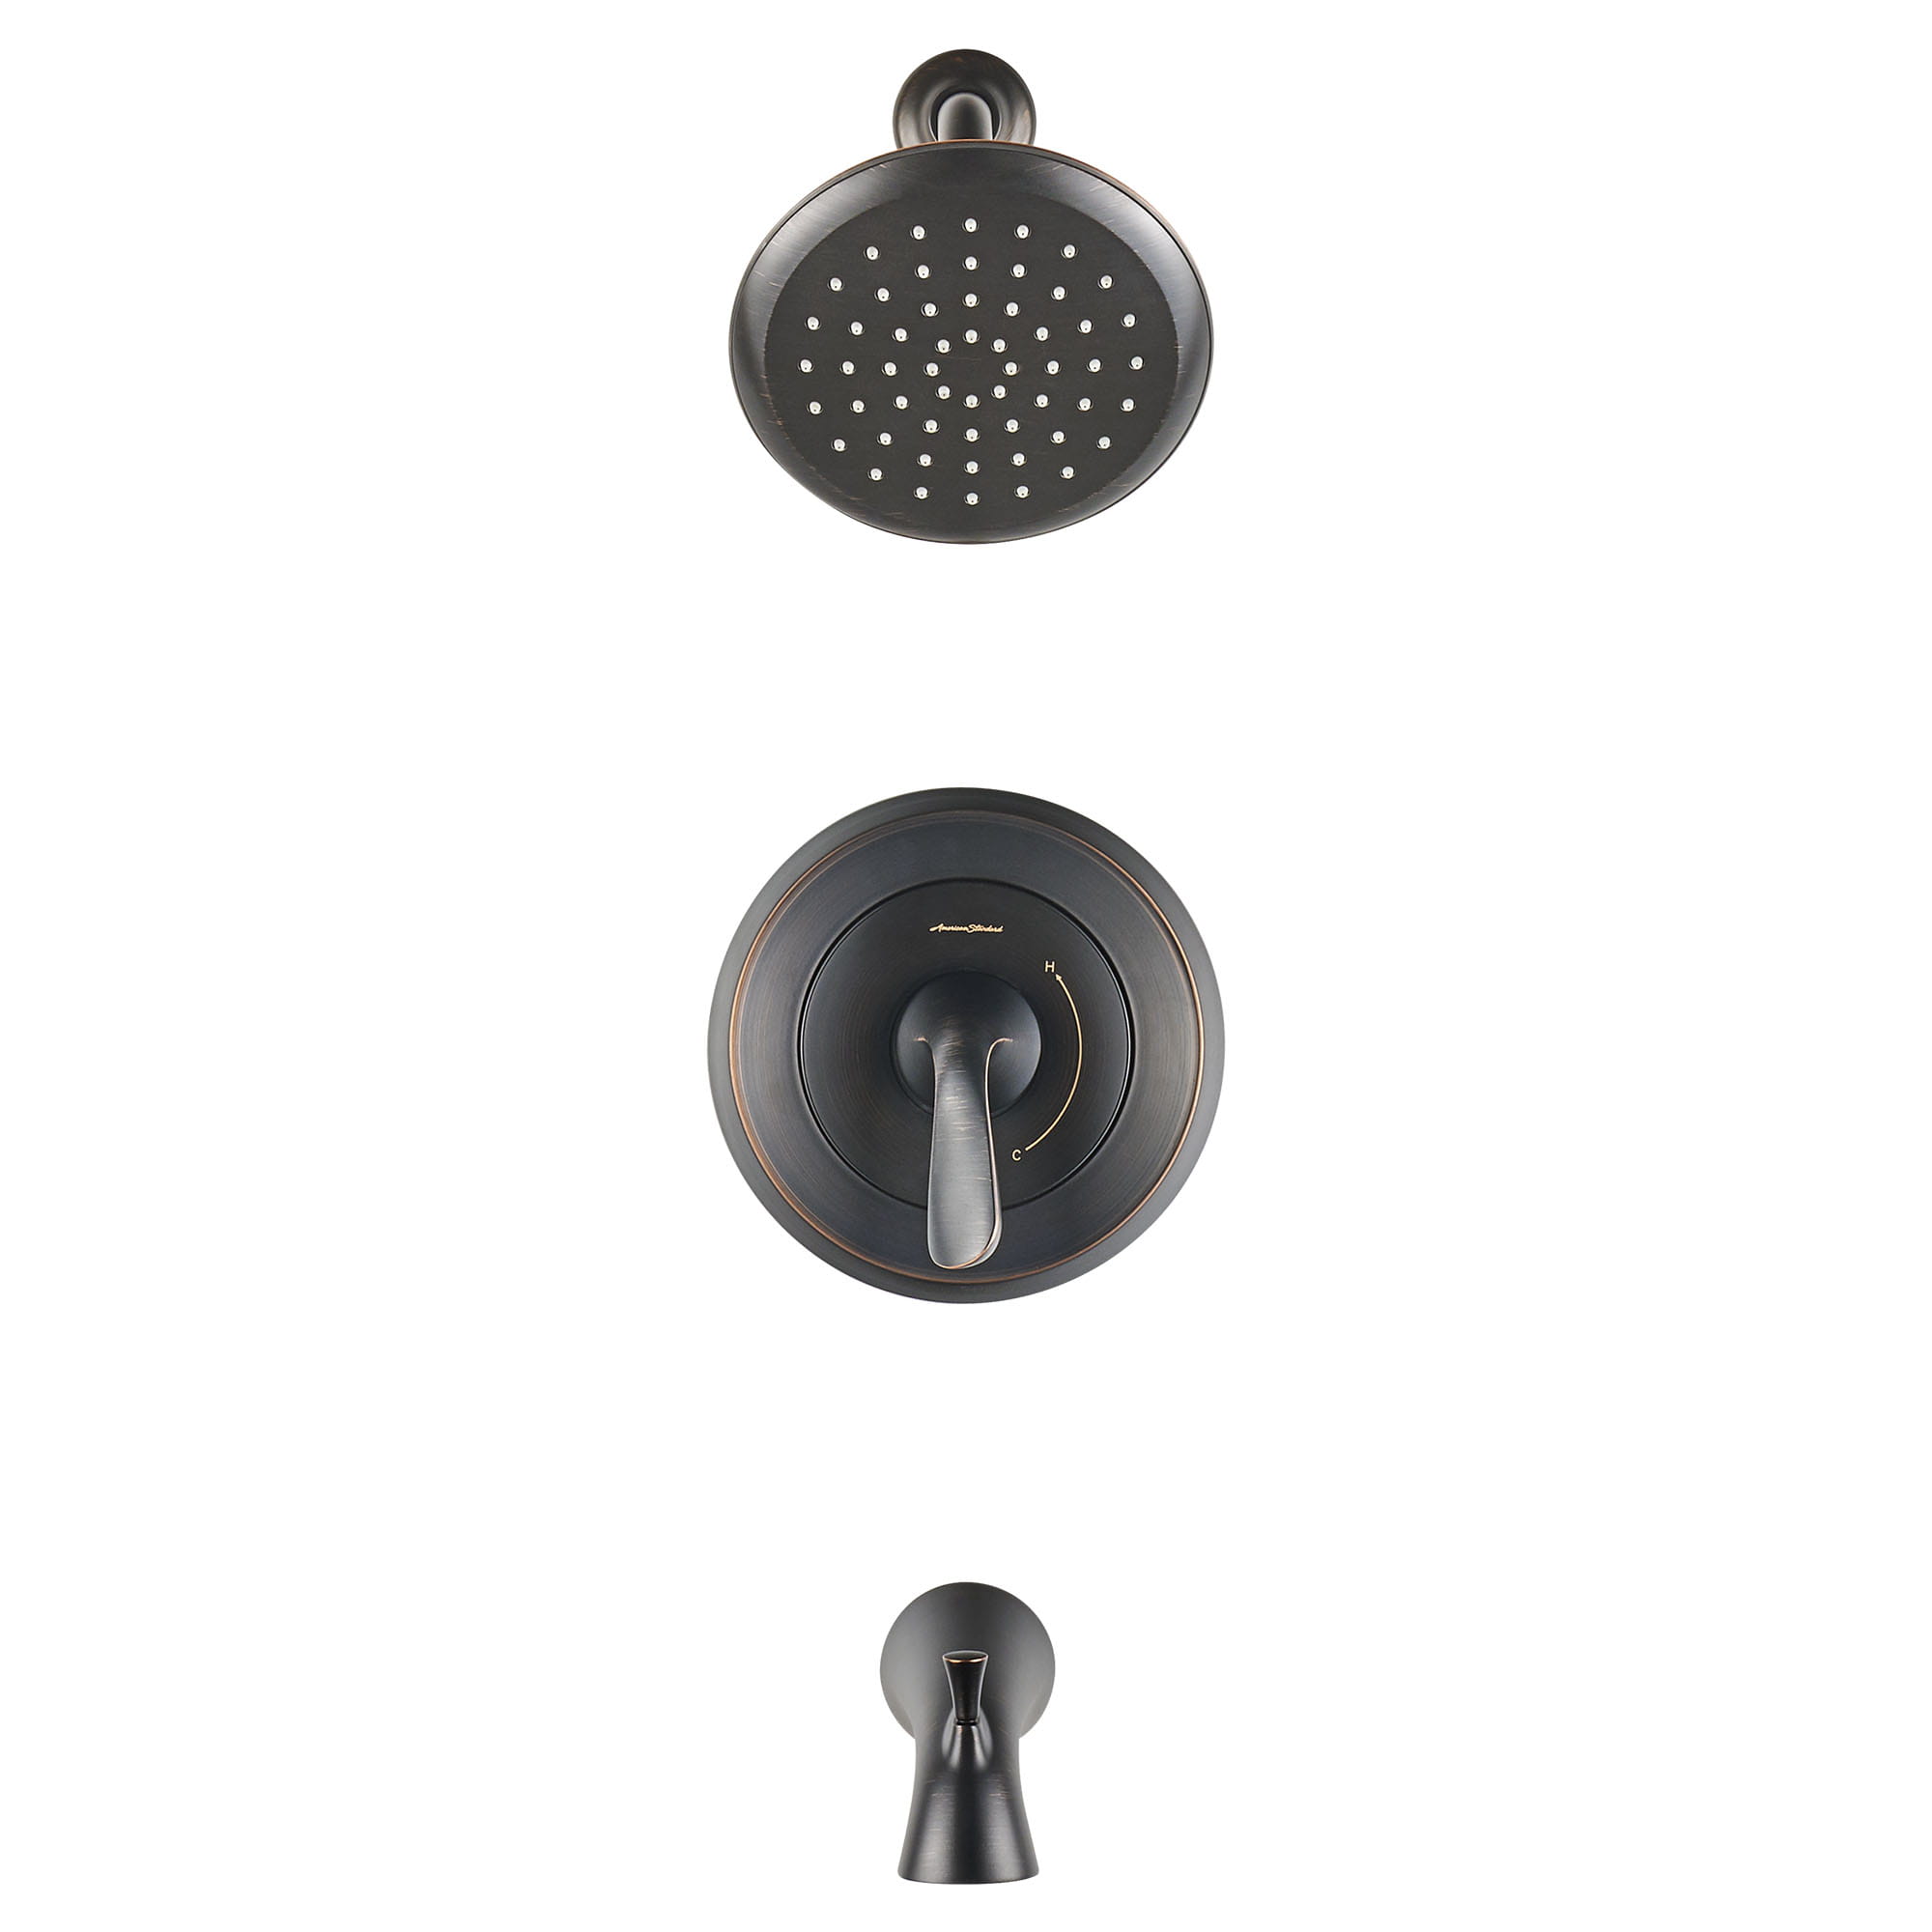 Fluent 18 gpm 68 L min Tub and Shower Trim Kit With Water Saving Showerhead Double Ceramic Pressure Balance Cartridge With Lever Handle LEGACY BRONZE